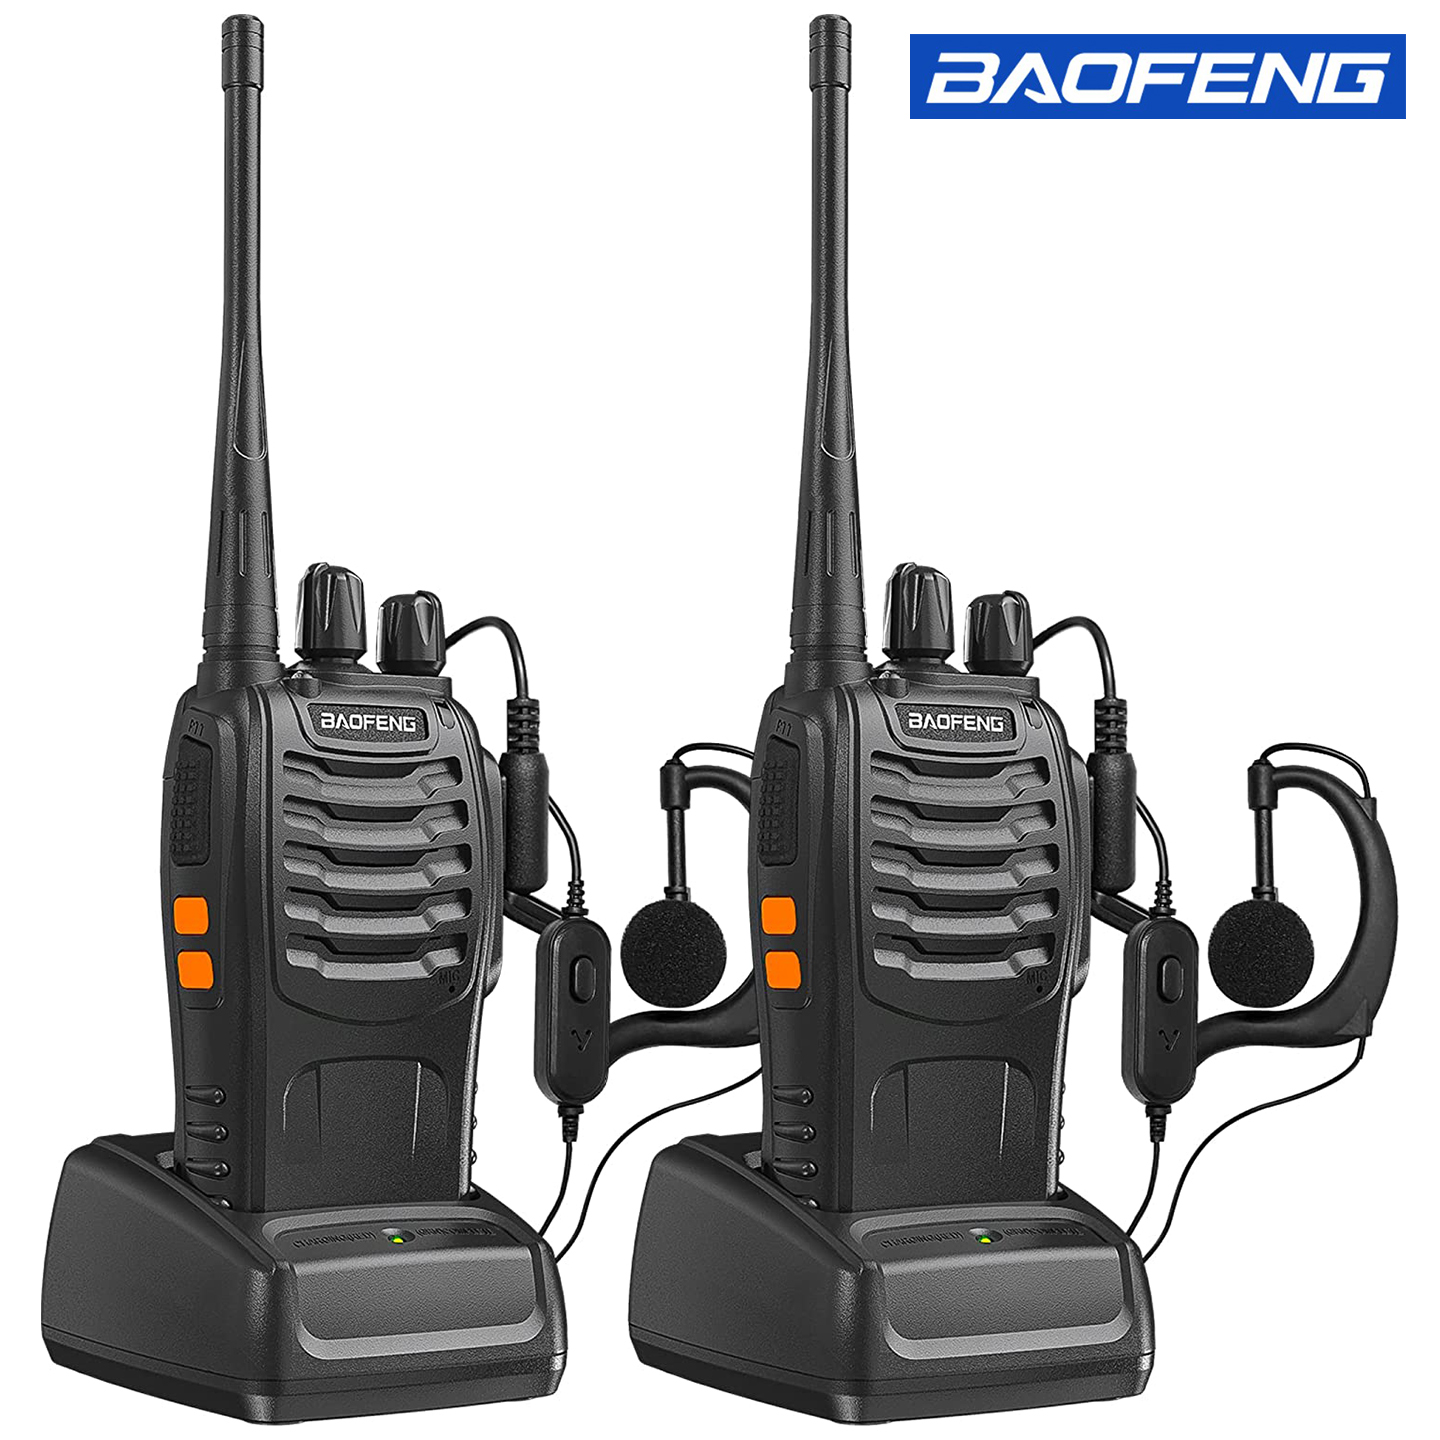 BAOFENG BF-888S Walkie Talkie 20 Pack Rechargeable Handheld Two Way Radio with Headset - 2